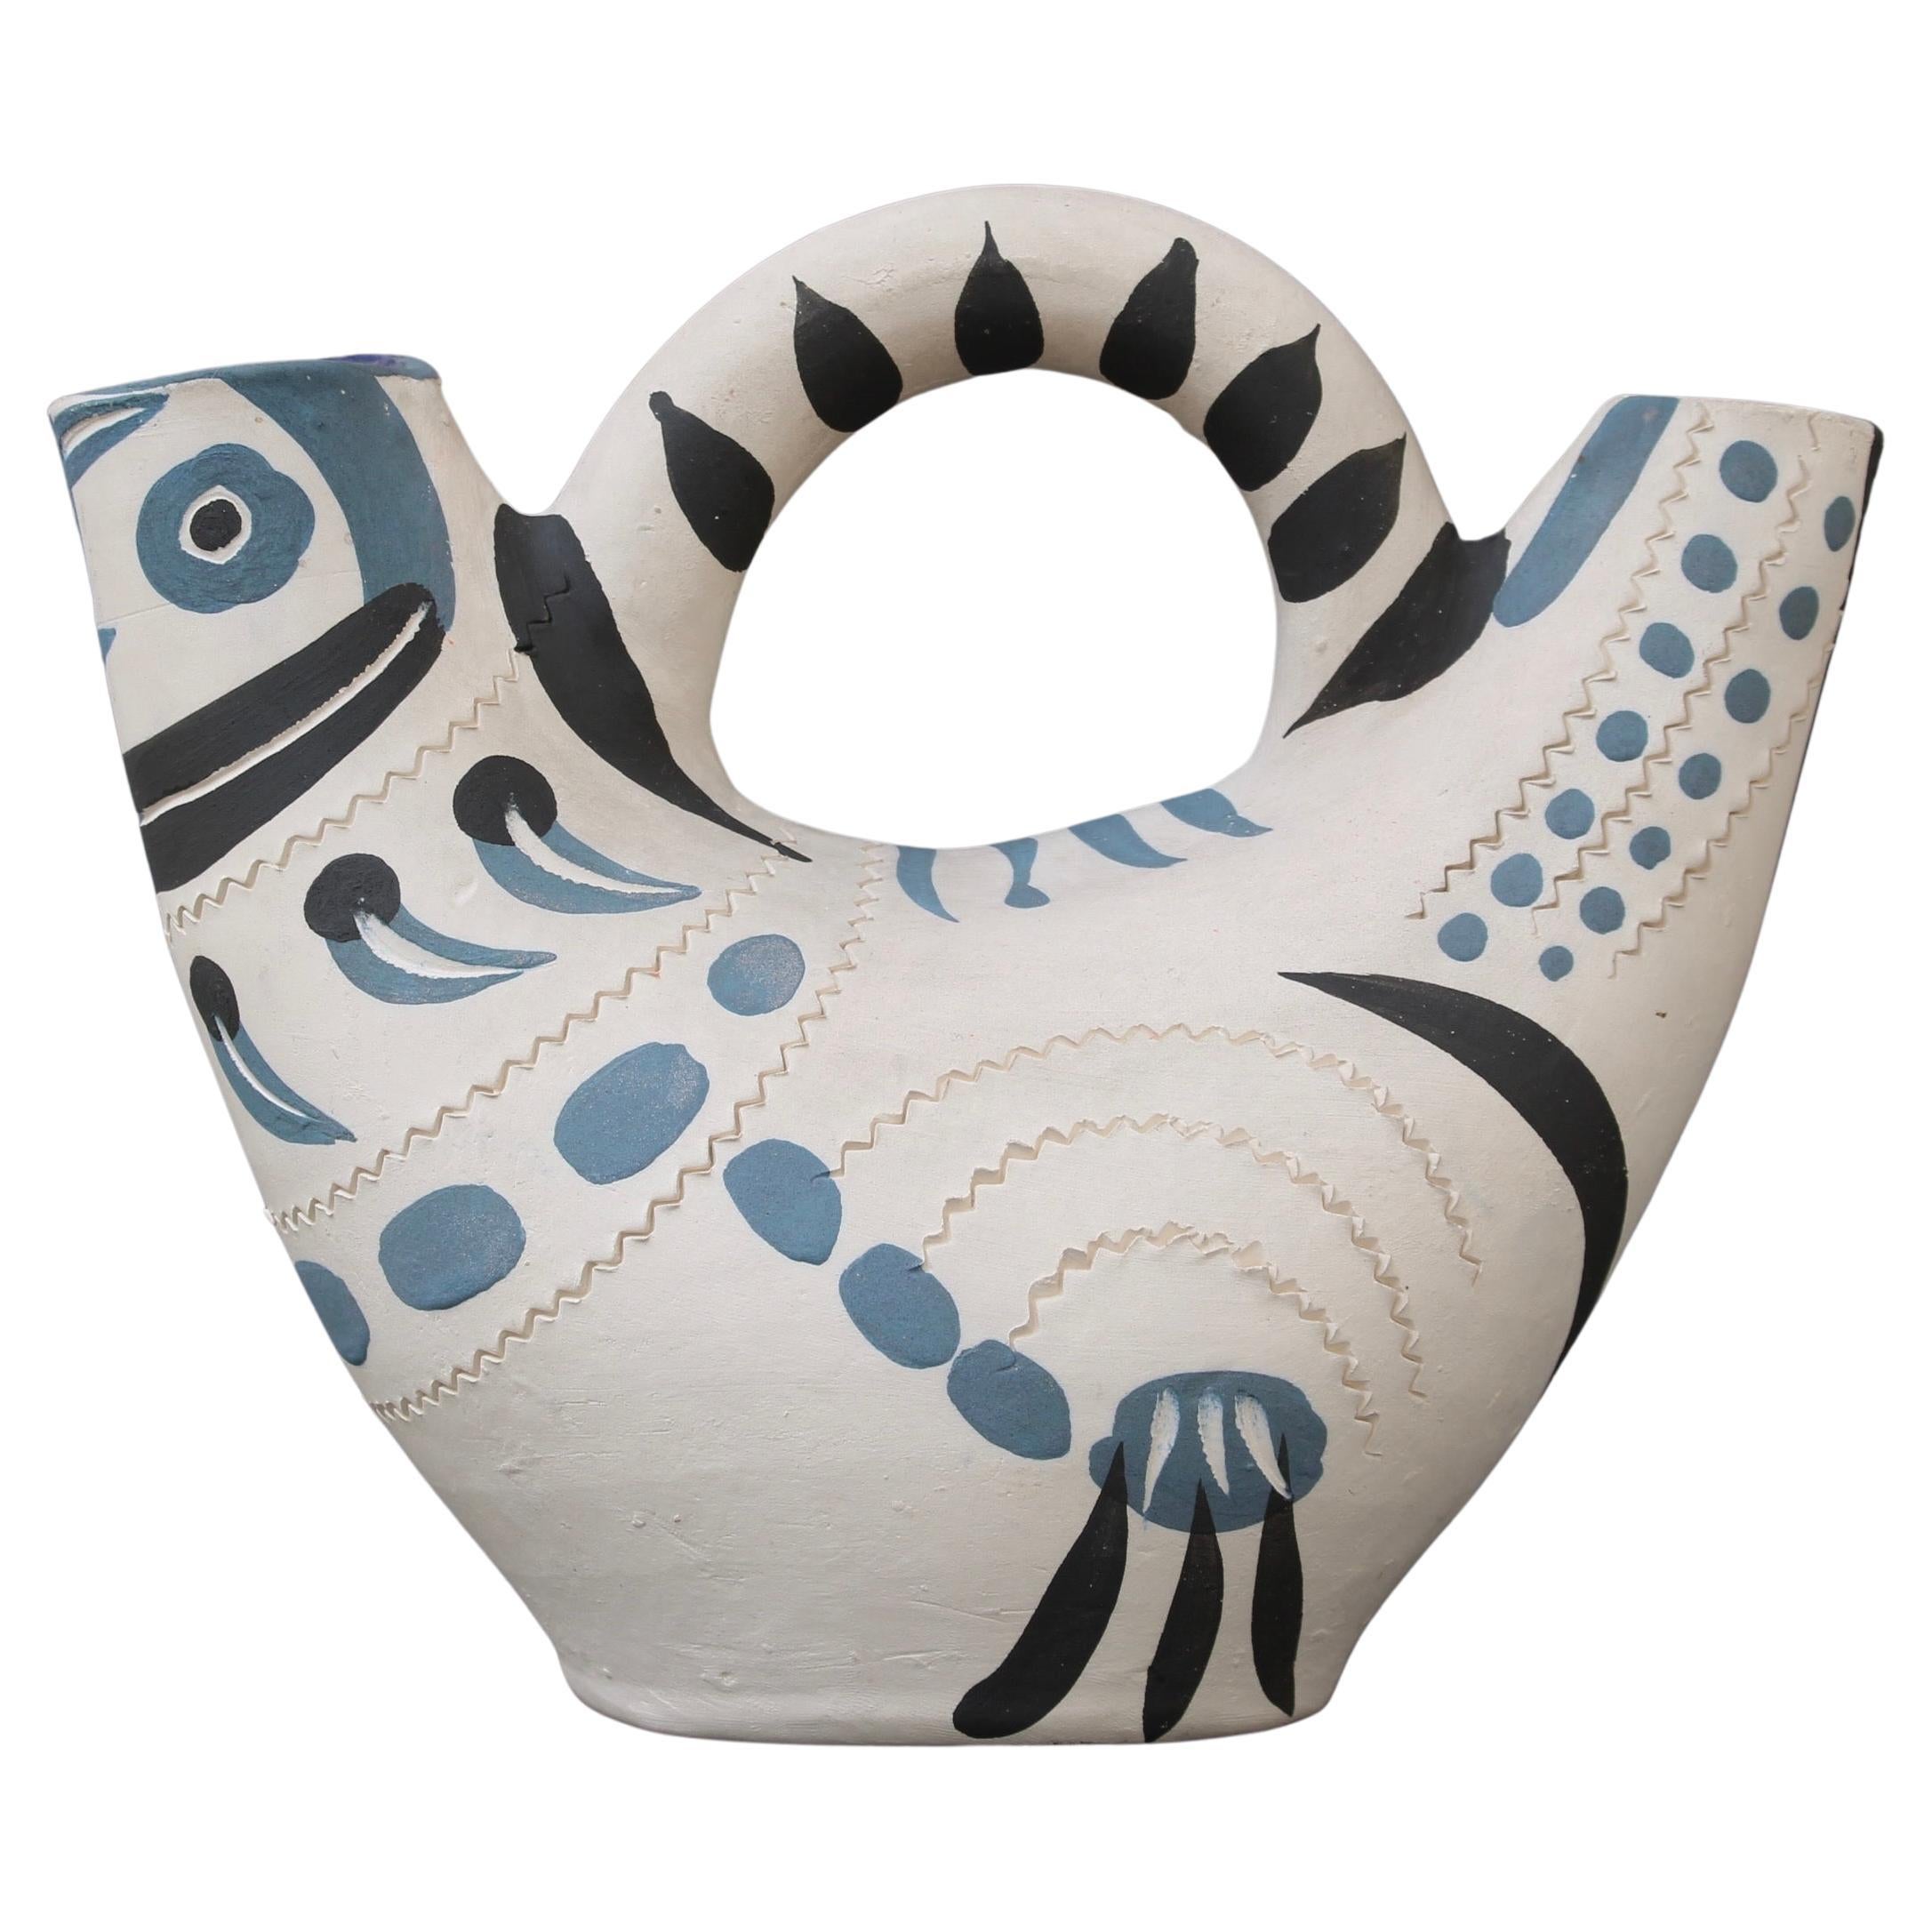 'Pichet Espagnol' from the Madoura Pottery 'AR 245' by Pablo Picasso '1954' For Sale